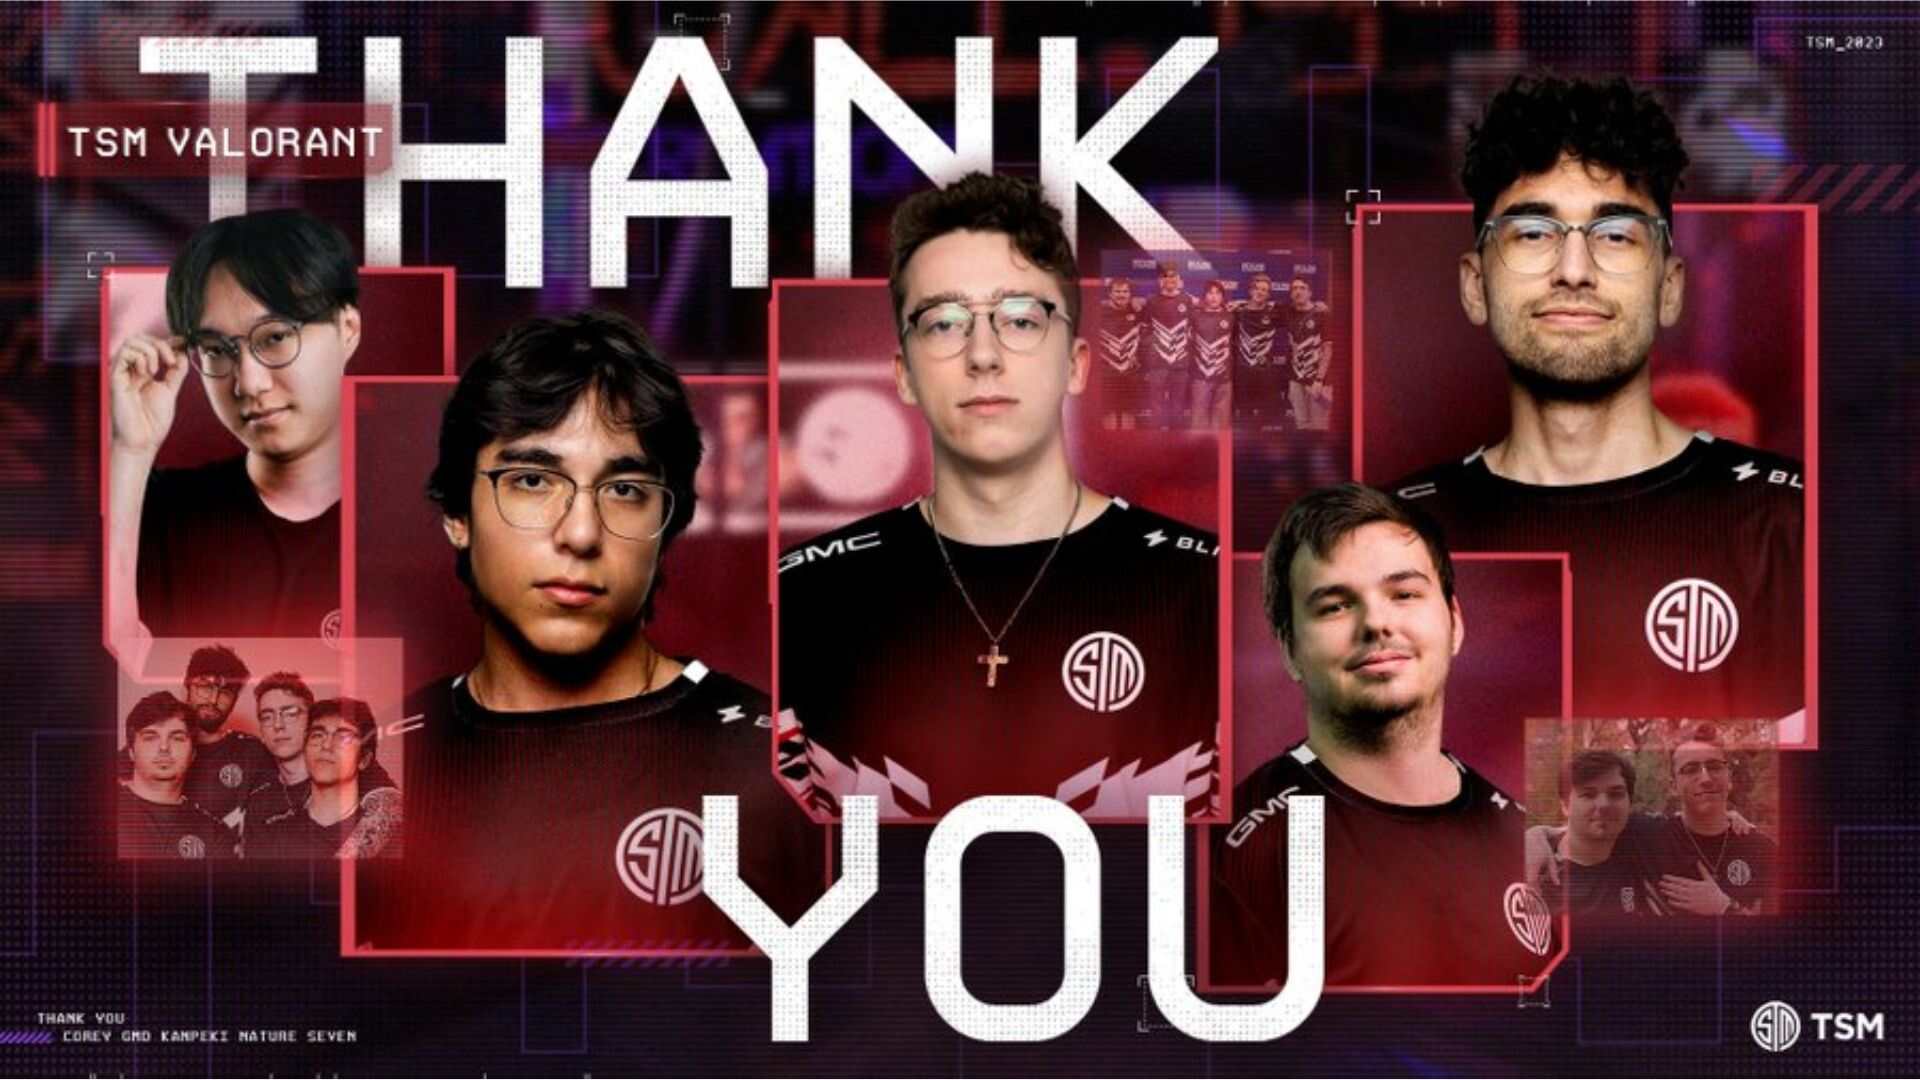 After being disqualified from Ascension Americas, TSM removes the VALORANT roster